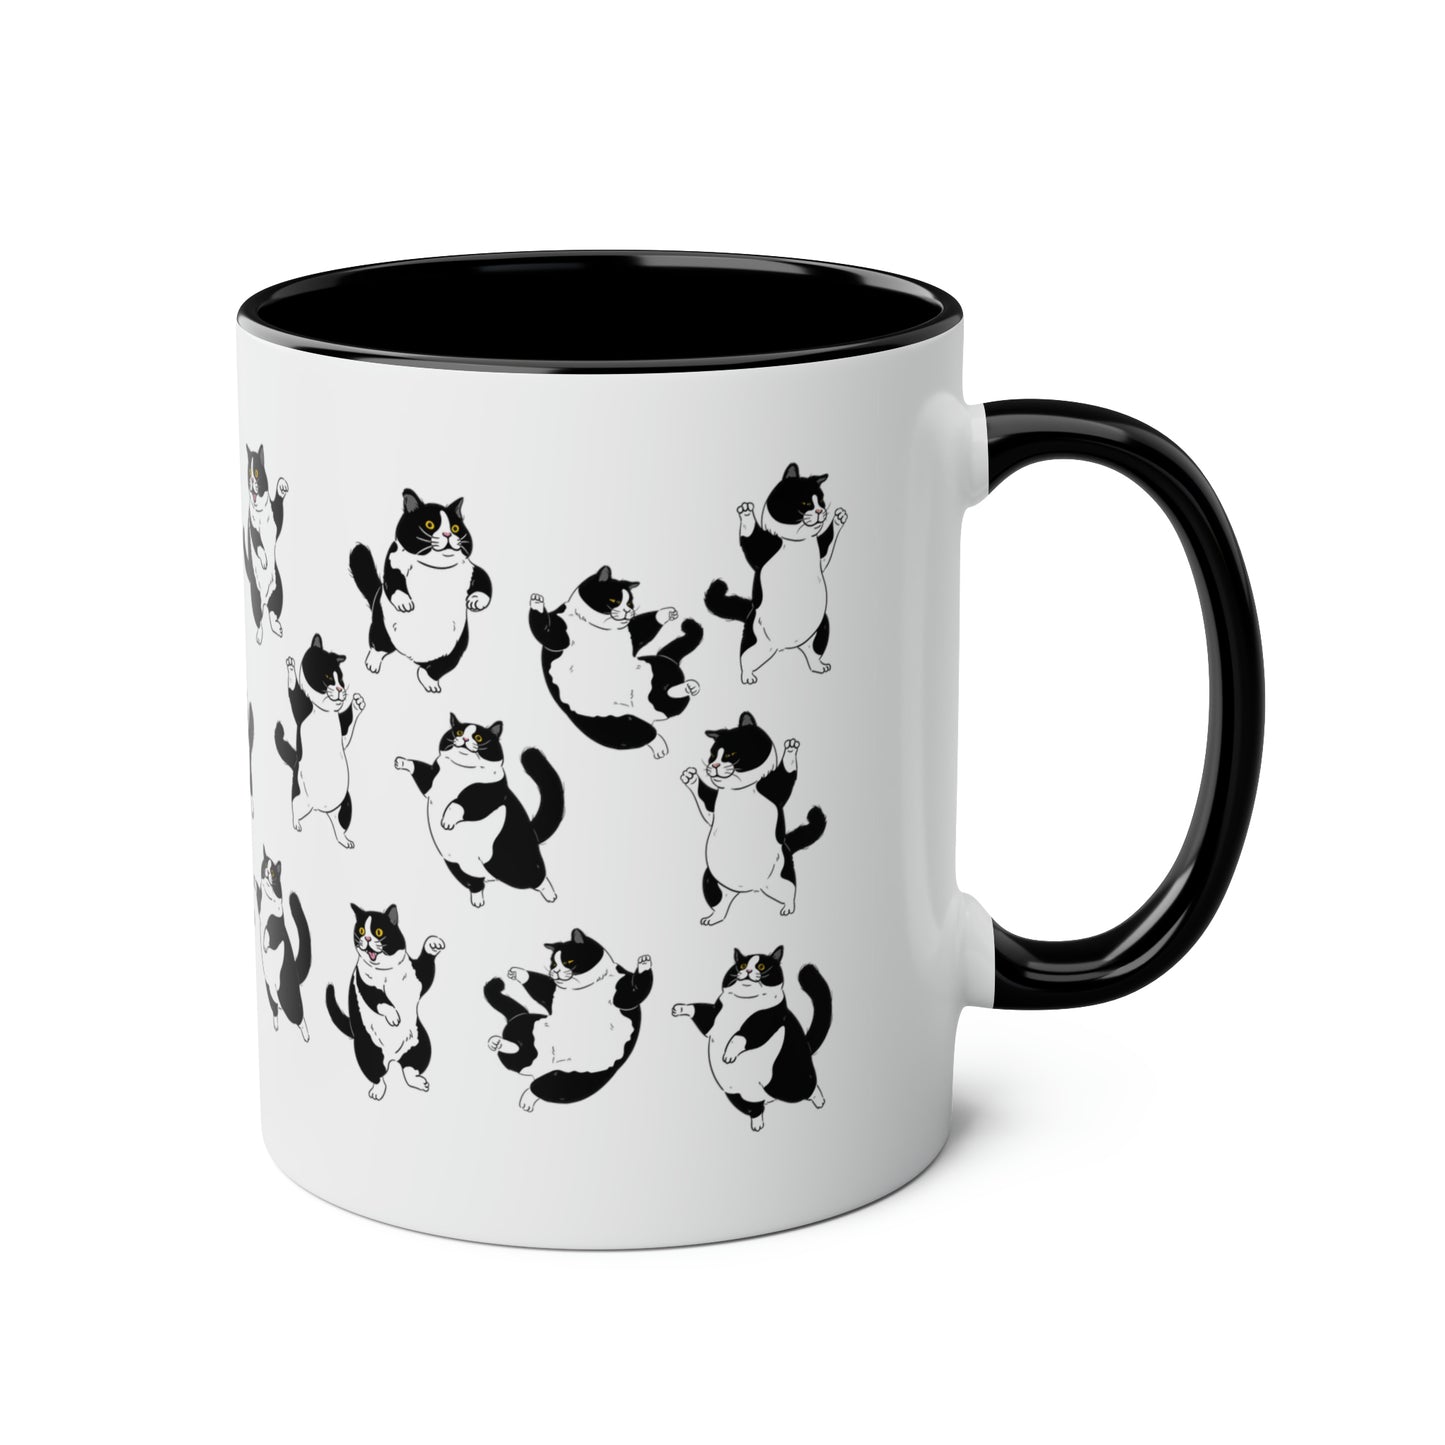 Tuxedo Cat 11oz white with black accent funny large coffee mug gift for her him feline cat lover furparent waveywares wavey wares wavywares wavy wares